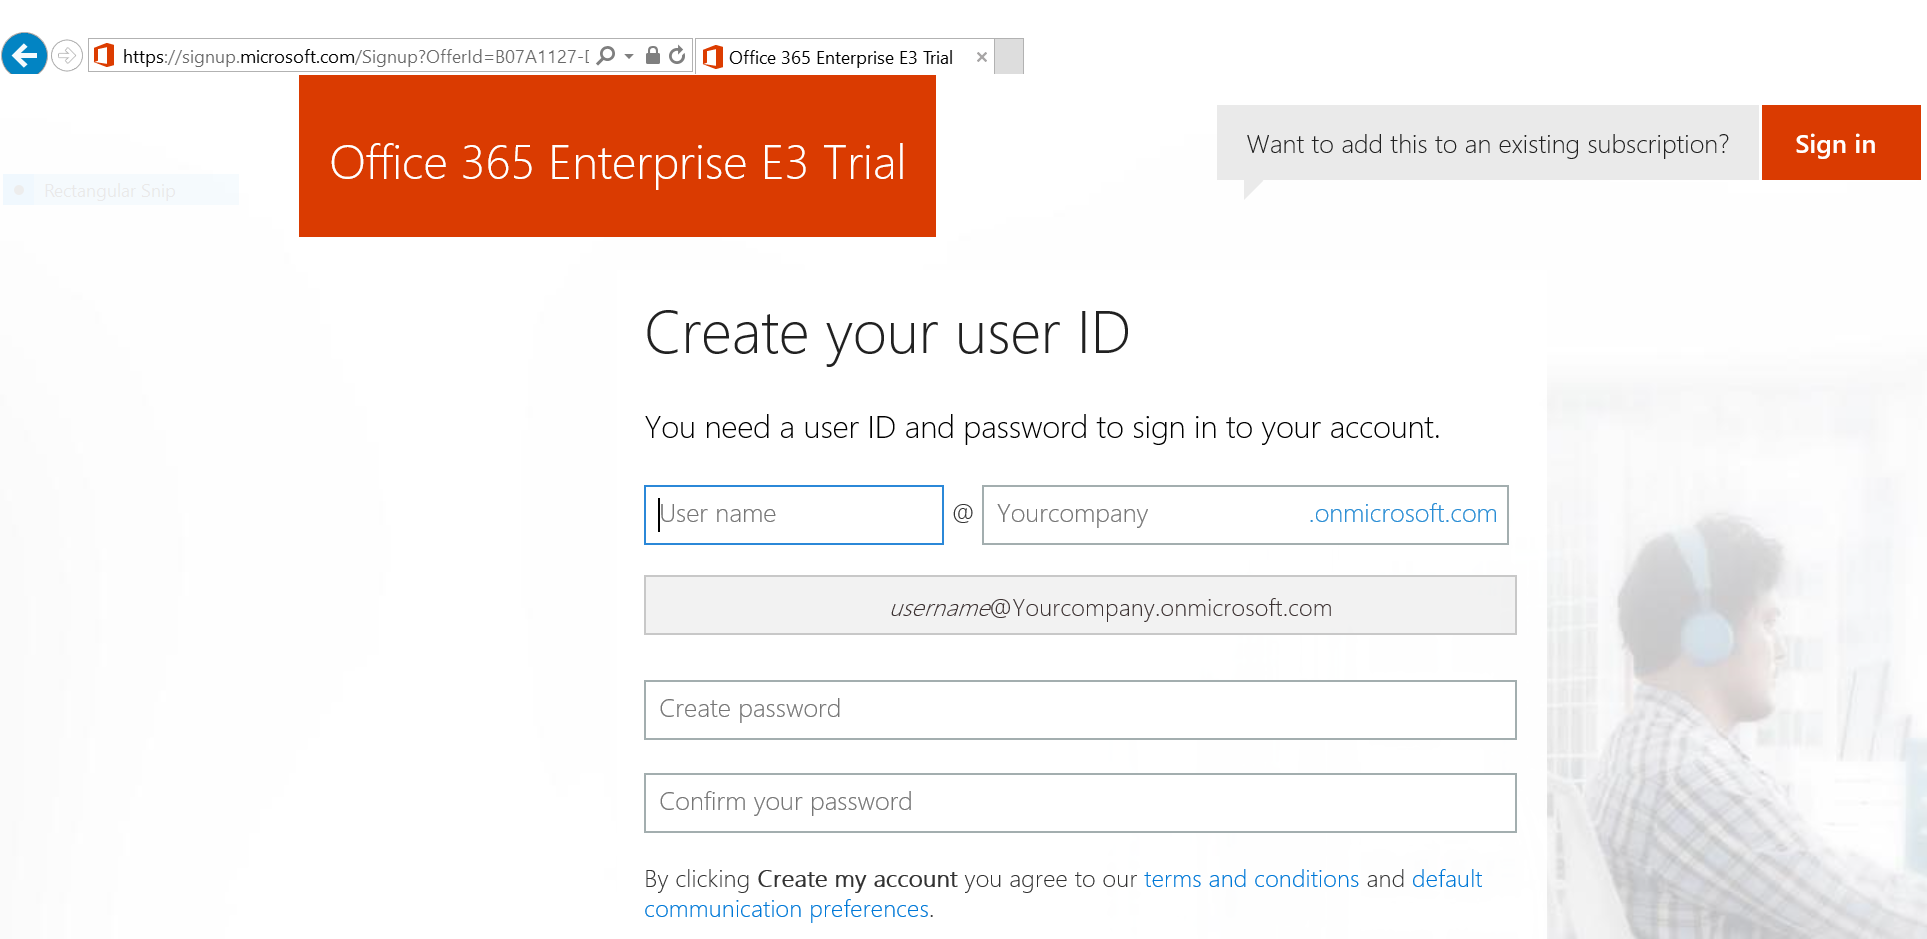 Office 365 trial subscription sign-up